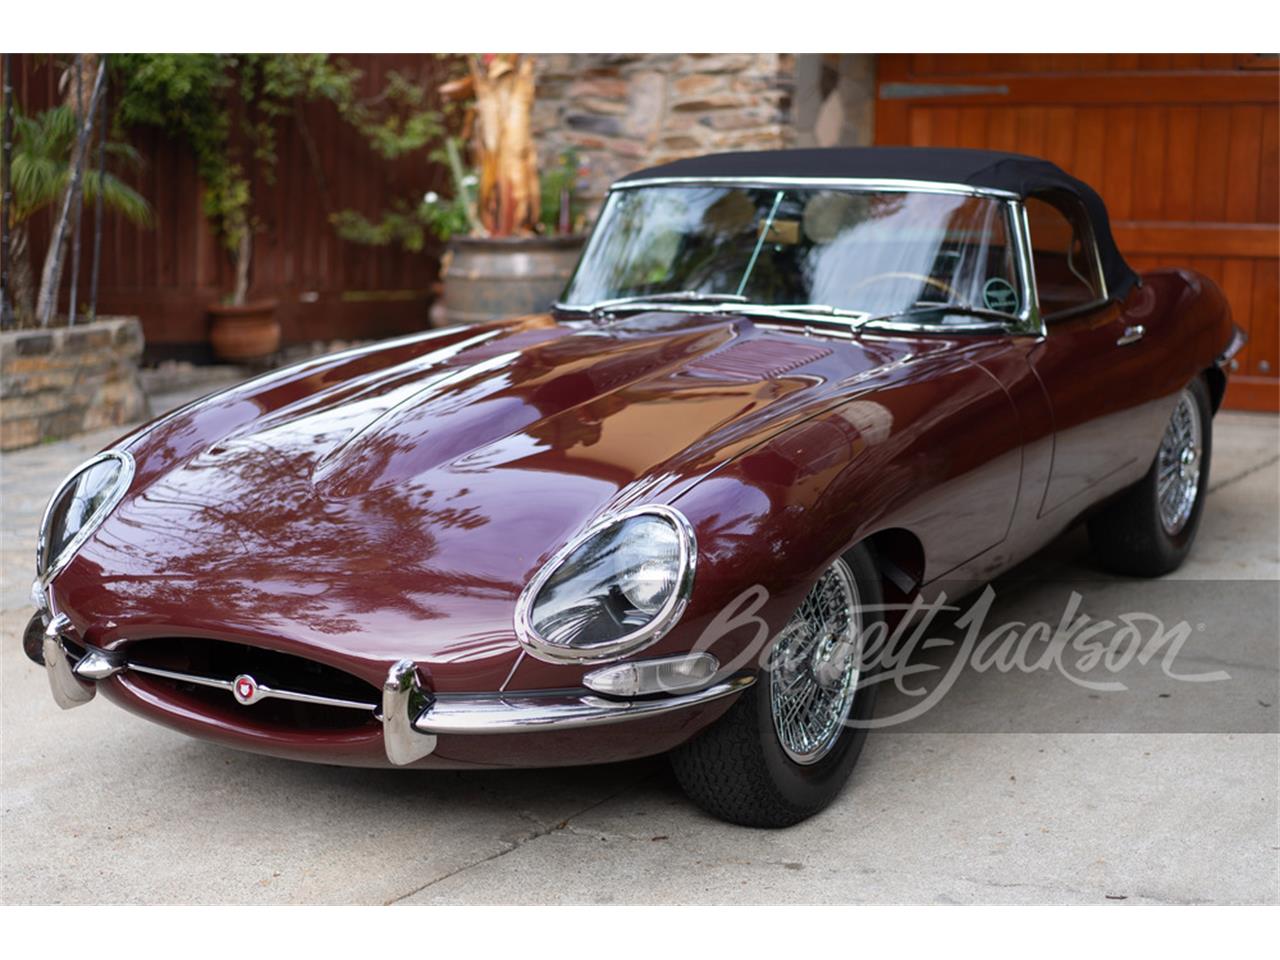 For Sale at Auction: 1964 Jaguar E-Type in Scottsdale, Arizona for sale in Scottsdale, AZ